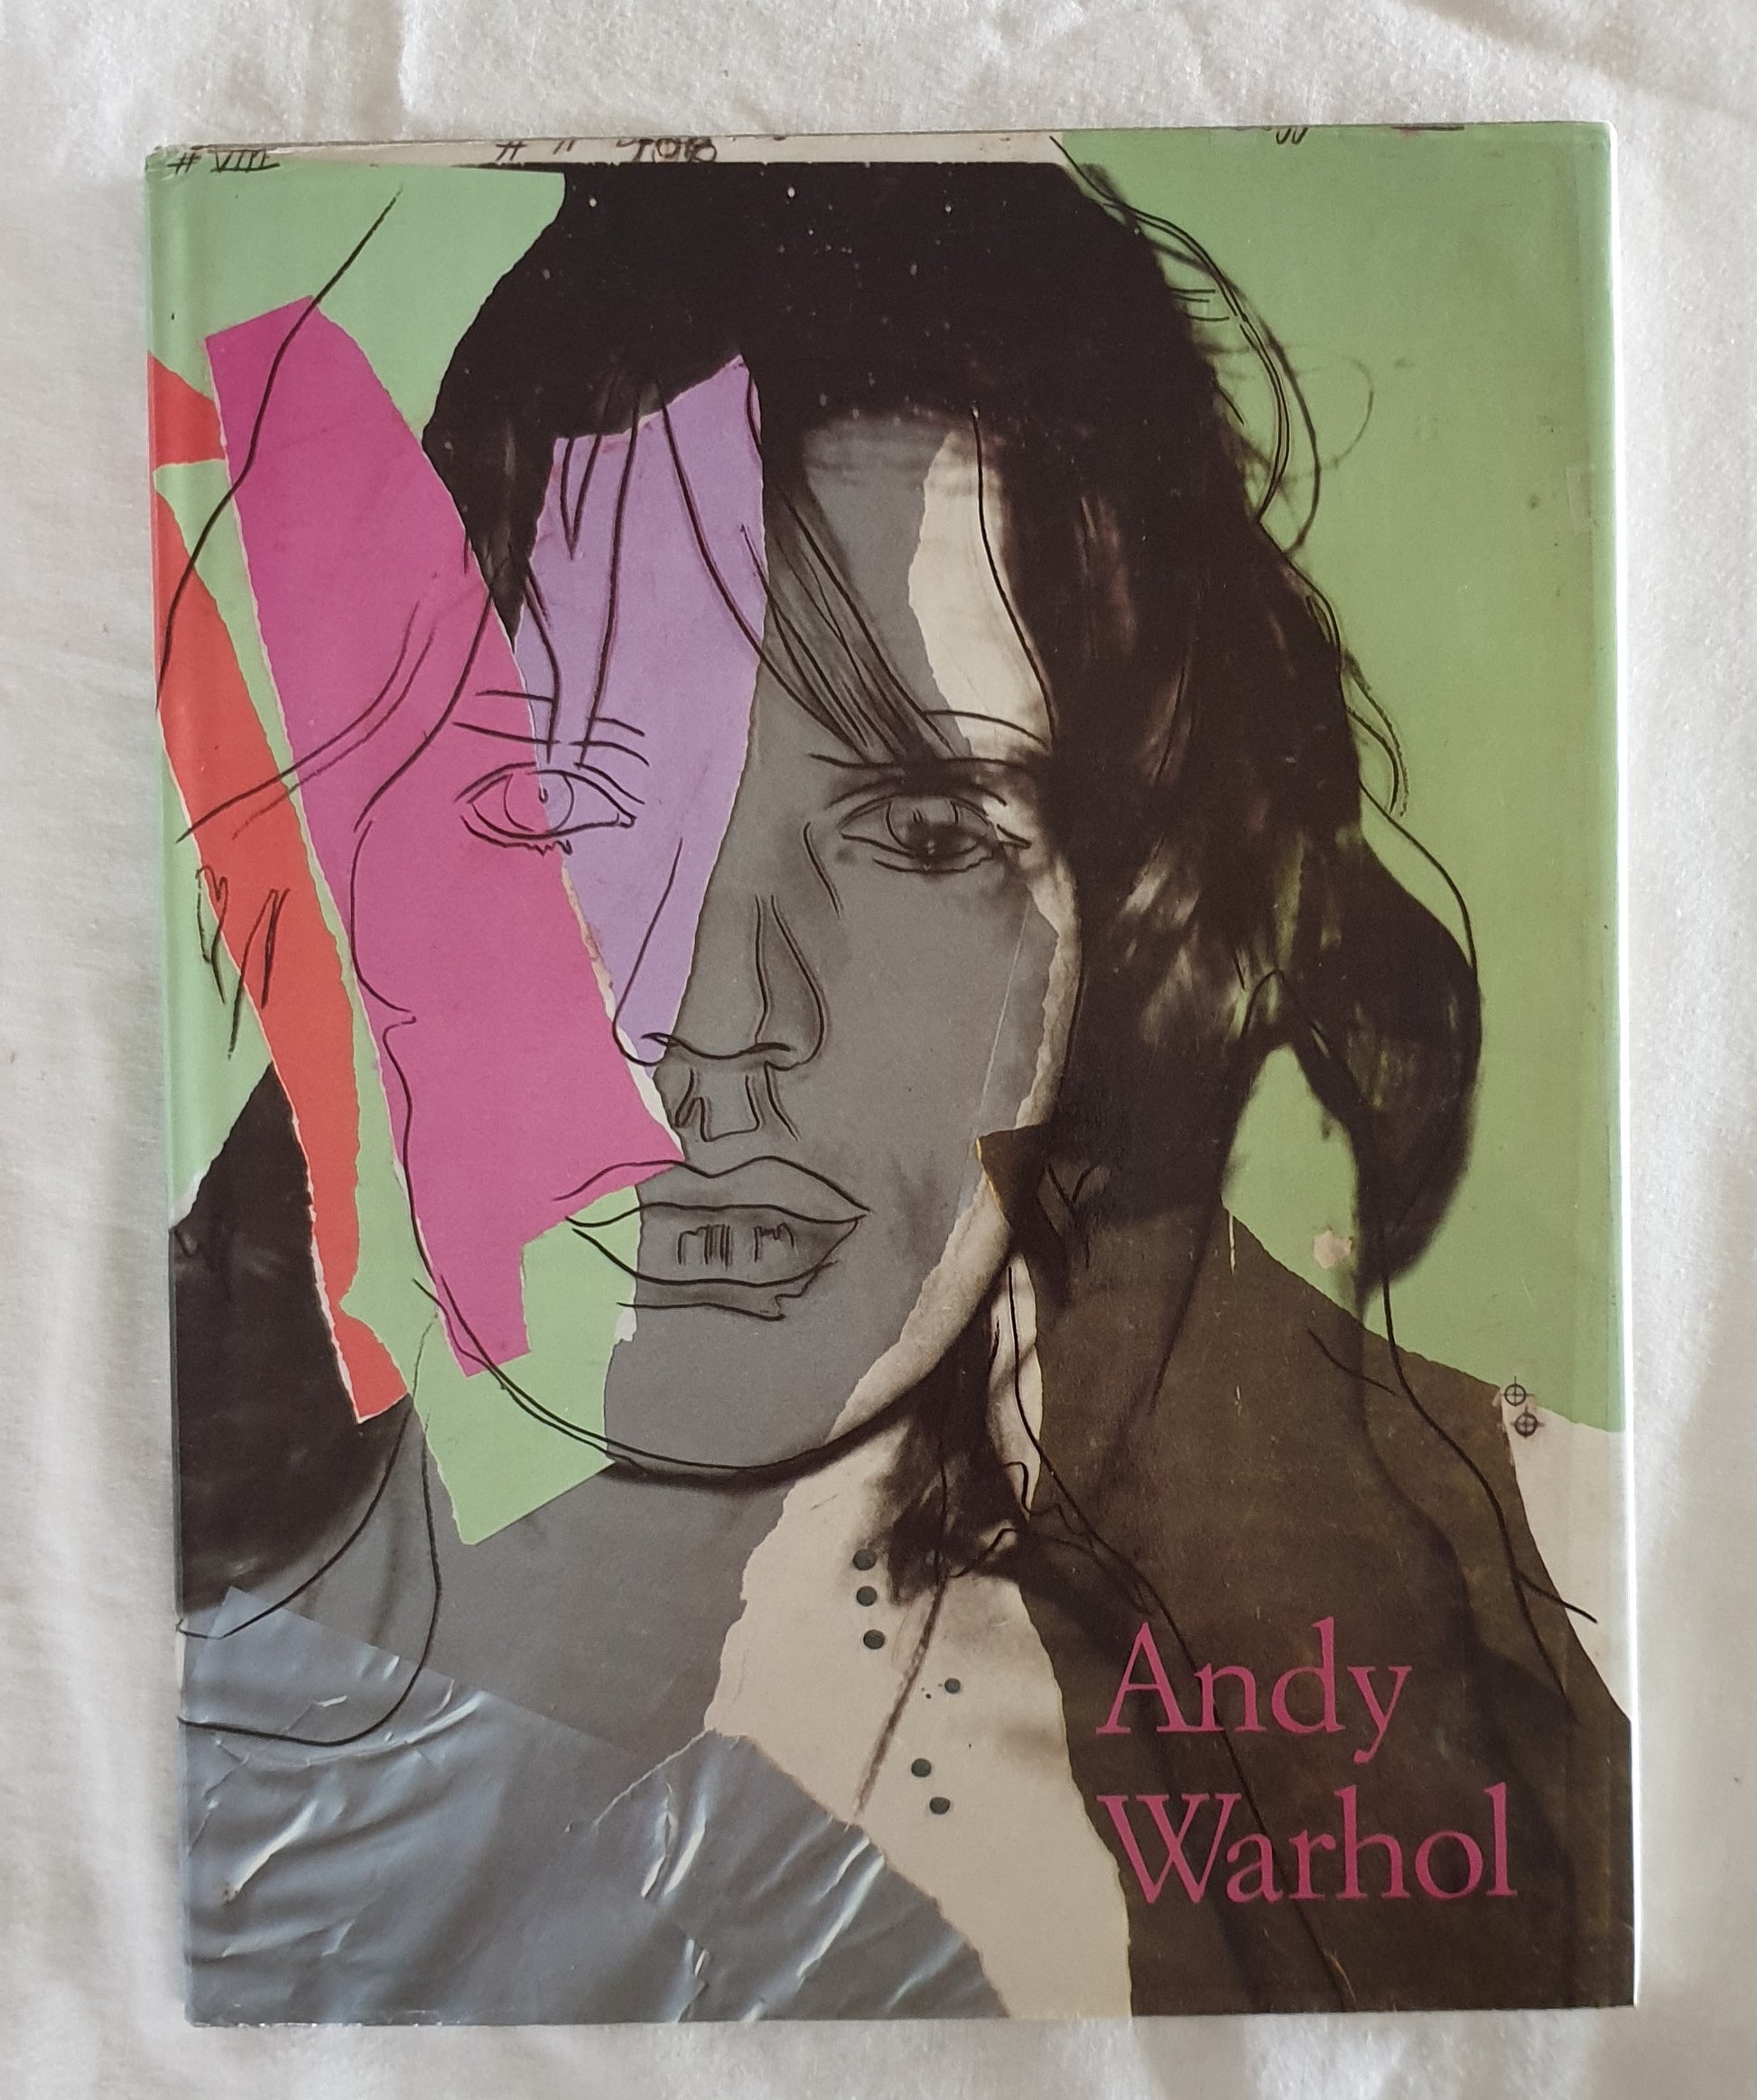 Andy Warhol 1928-1987  Commerce into Art  by Klaus Honnef